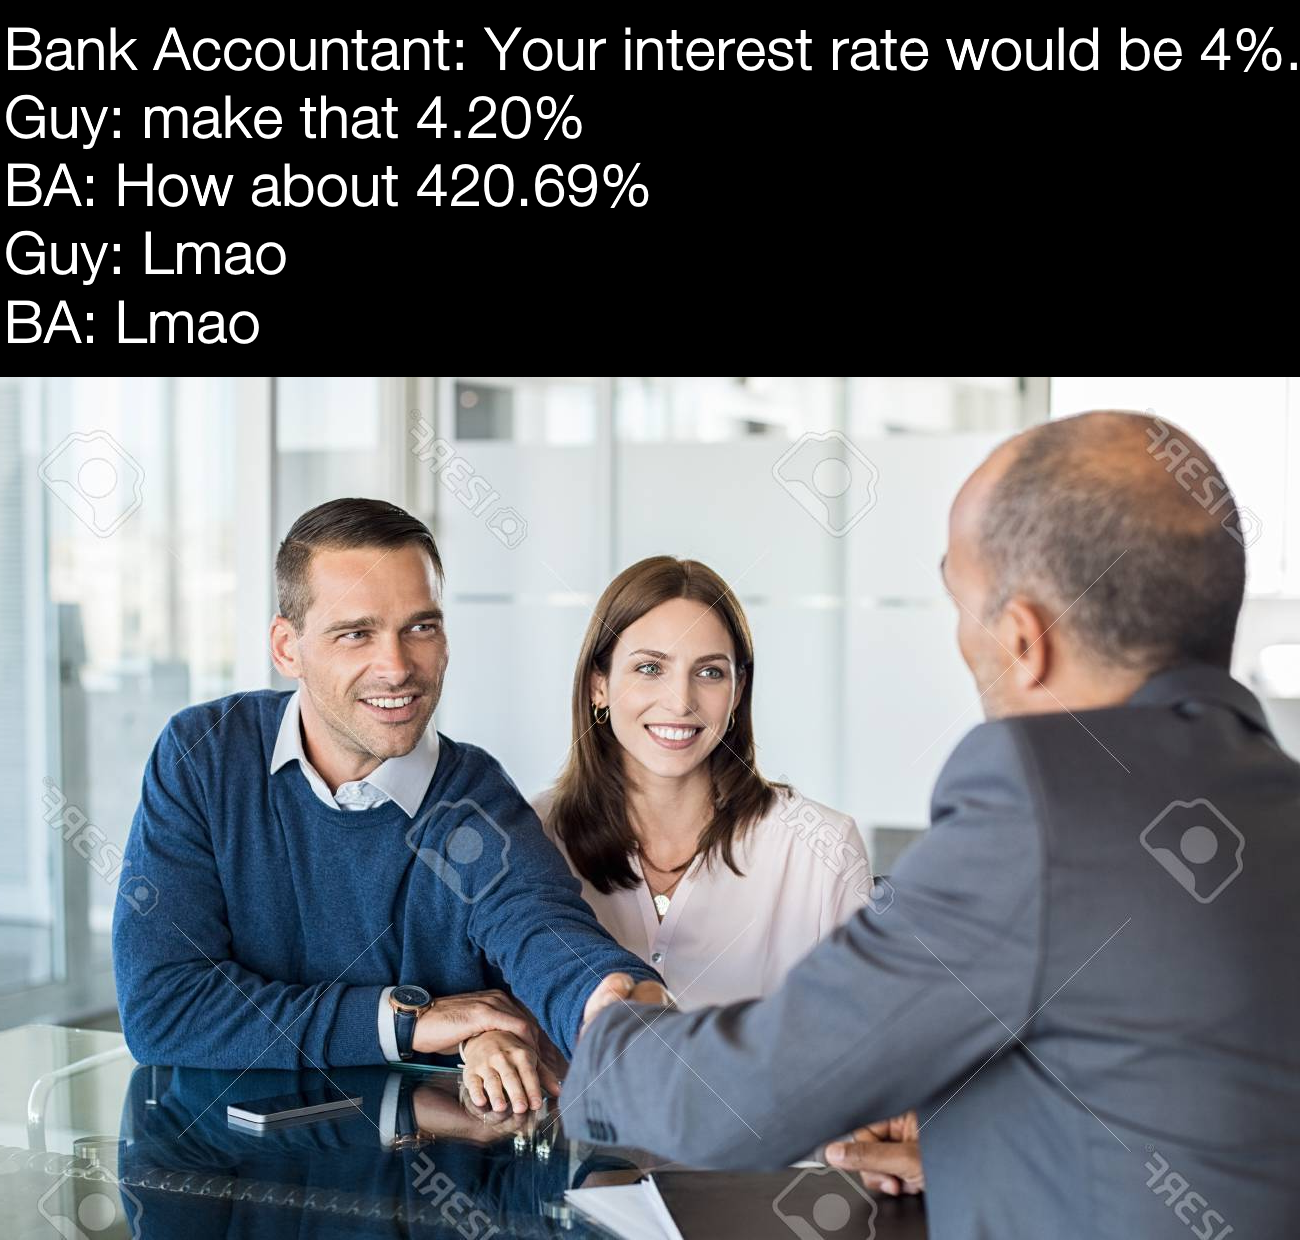 weed meme- Interest - Bank Accountant Your interest rate would be 4%. Guy make that 4.20% Ba How about 420.69% Guy Lmao Ba Lmao Es